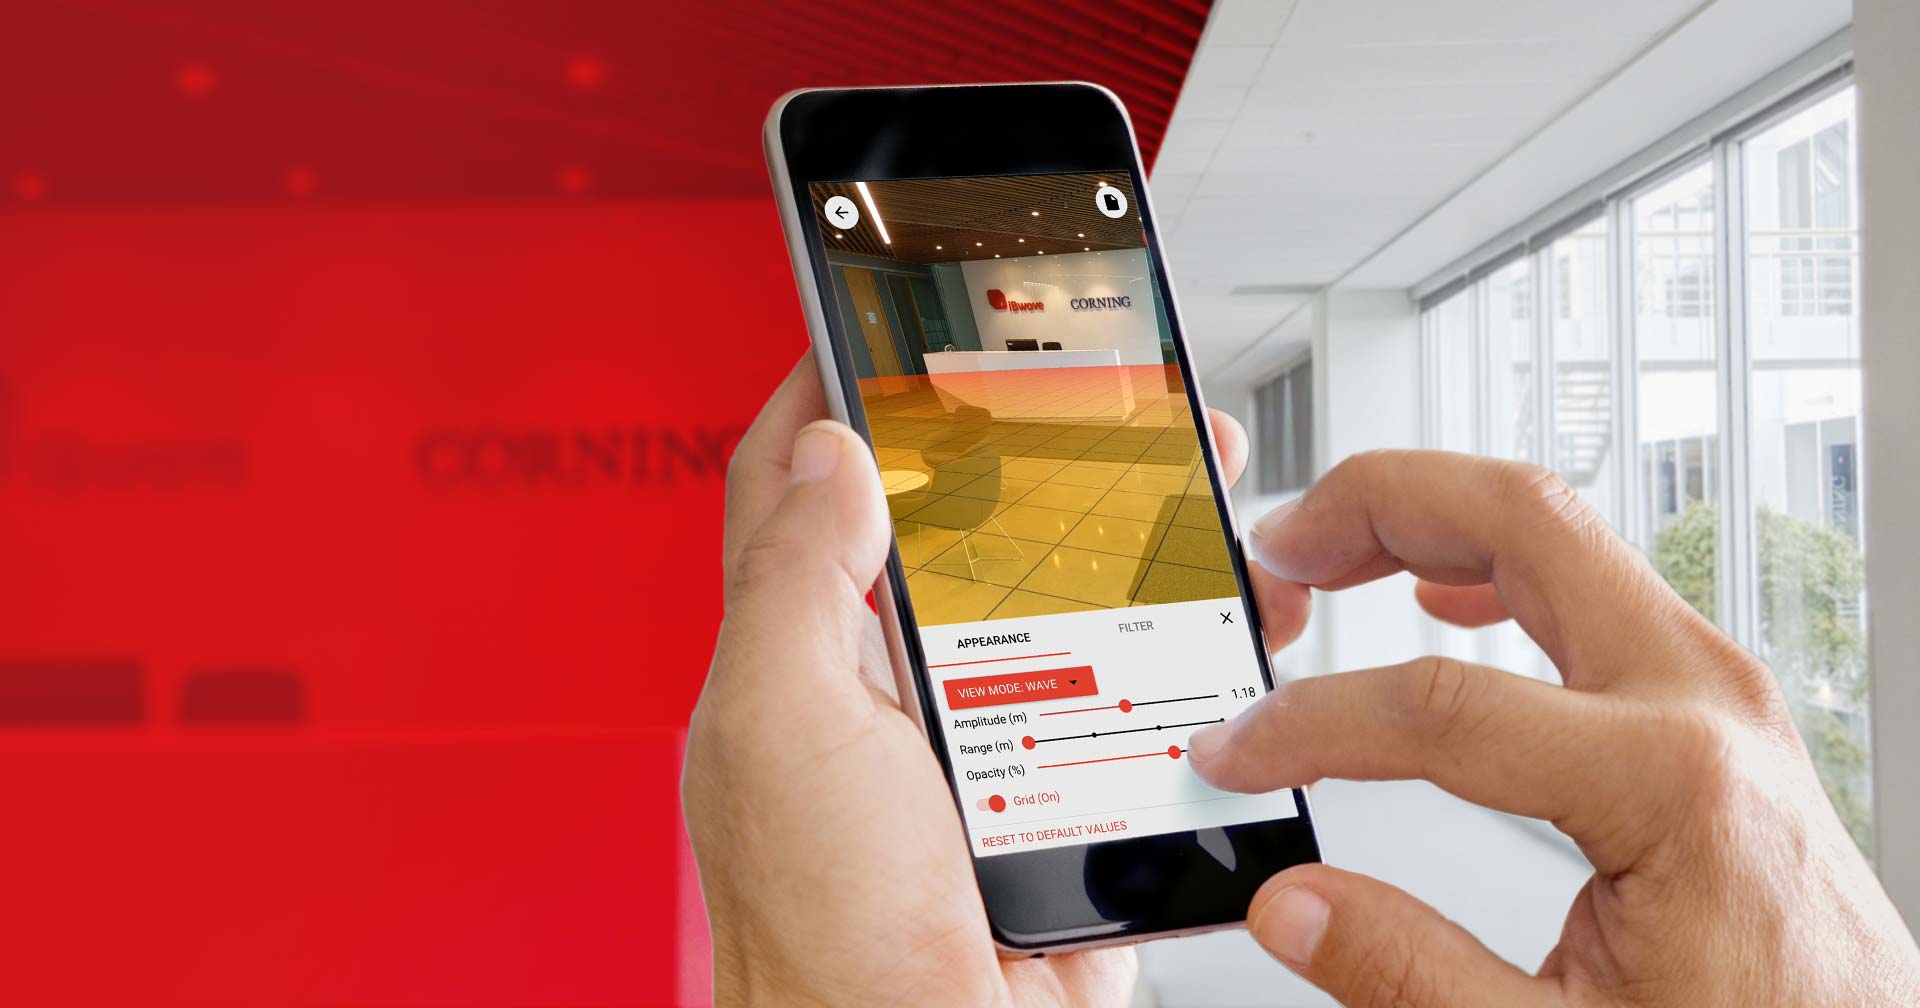 Introducing Augmented Reality in iBwave Wi-Fi Mobile